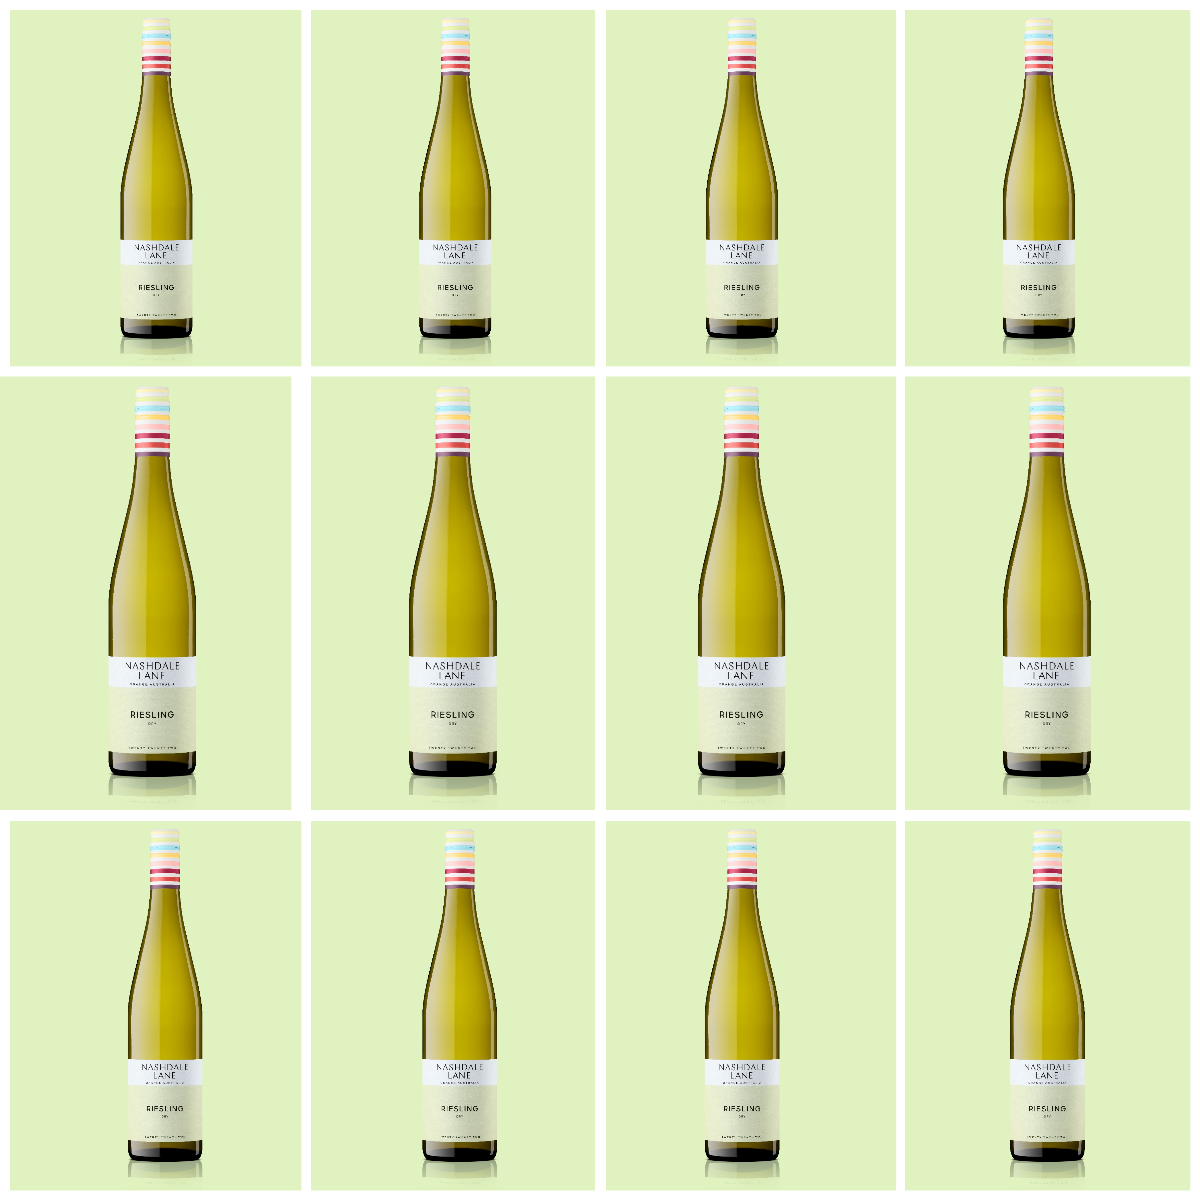 2022 Riesling Dry - 12 bottle case